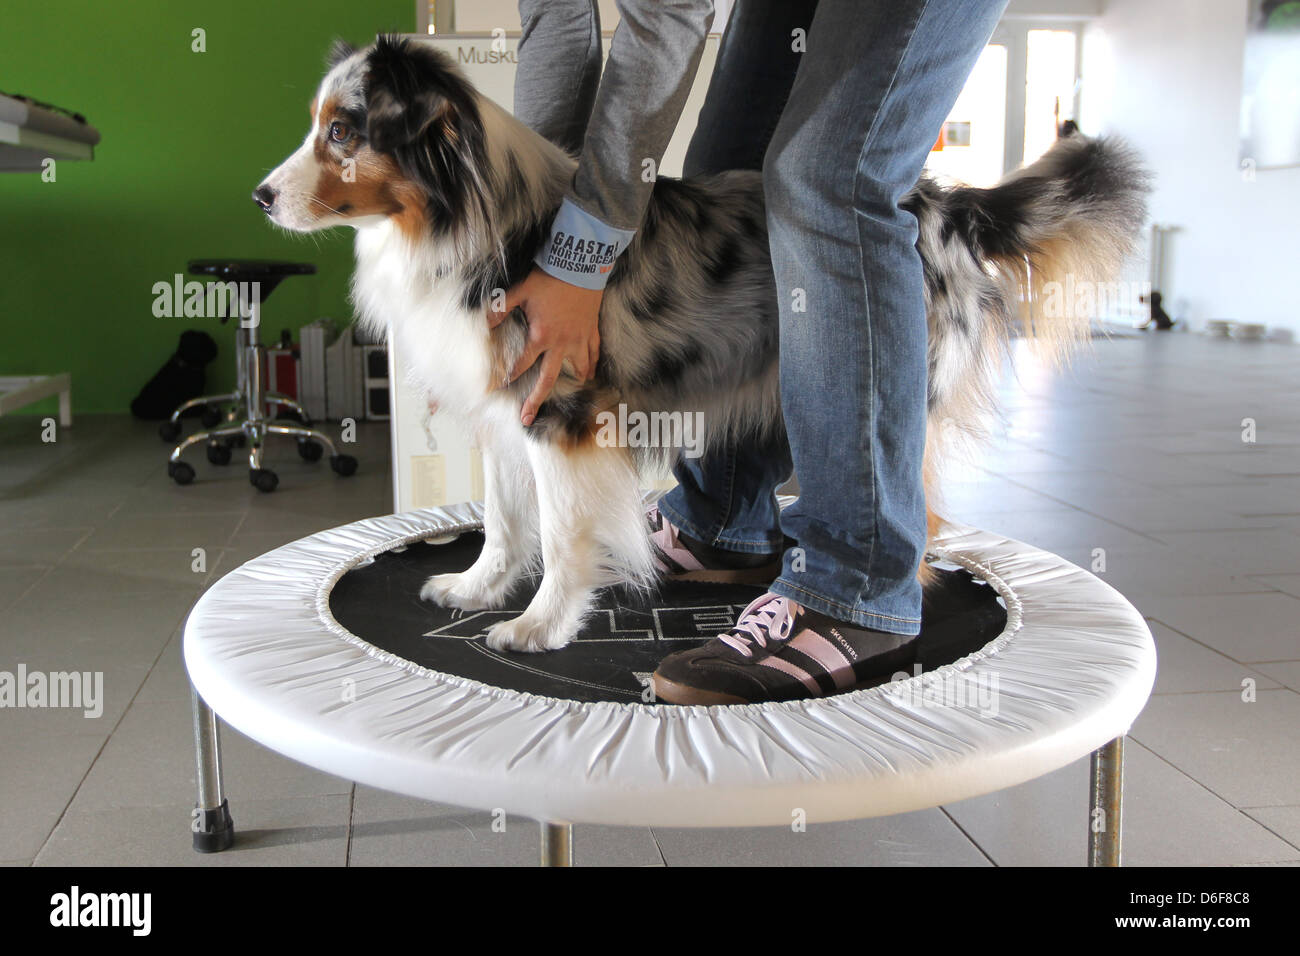 Wees, Germany, an Australian Shepherd dog on a trampoline in the therapeutic physiotherapy practice Beastly fit Stock Photo